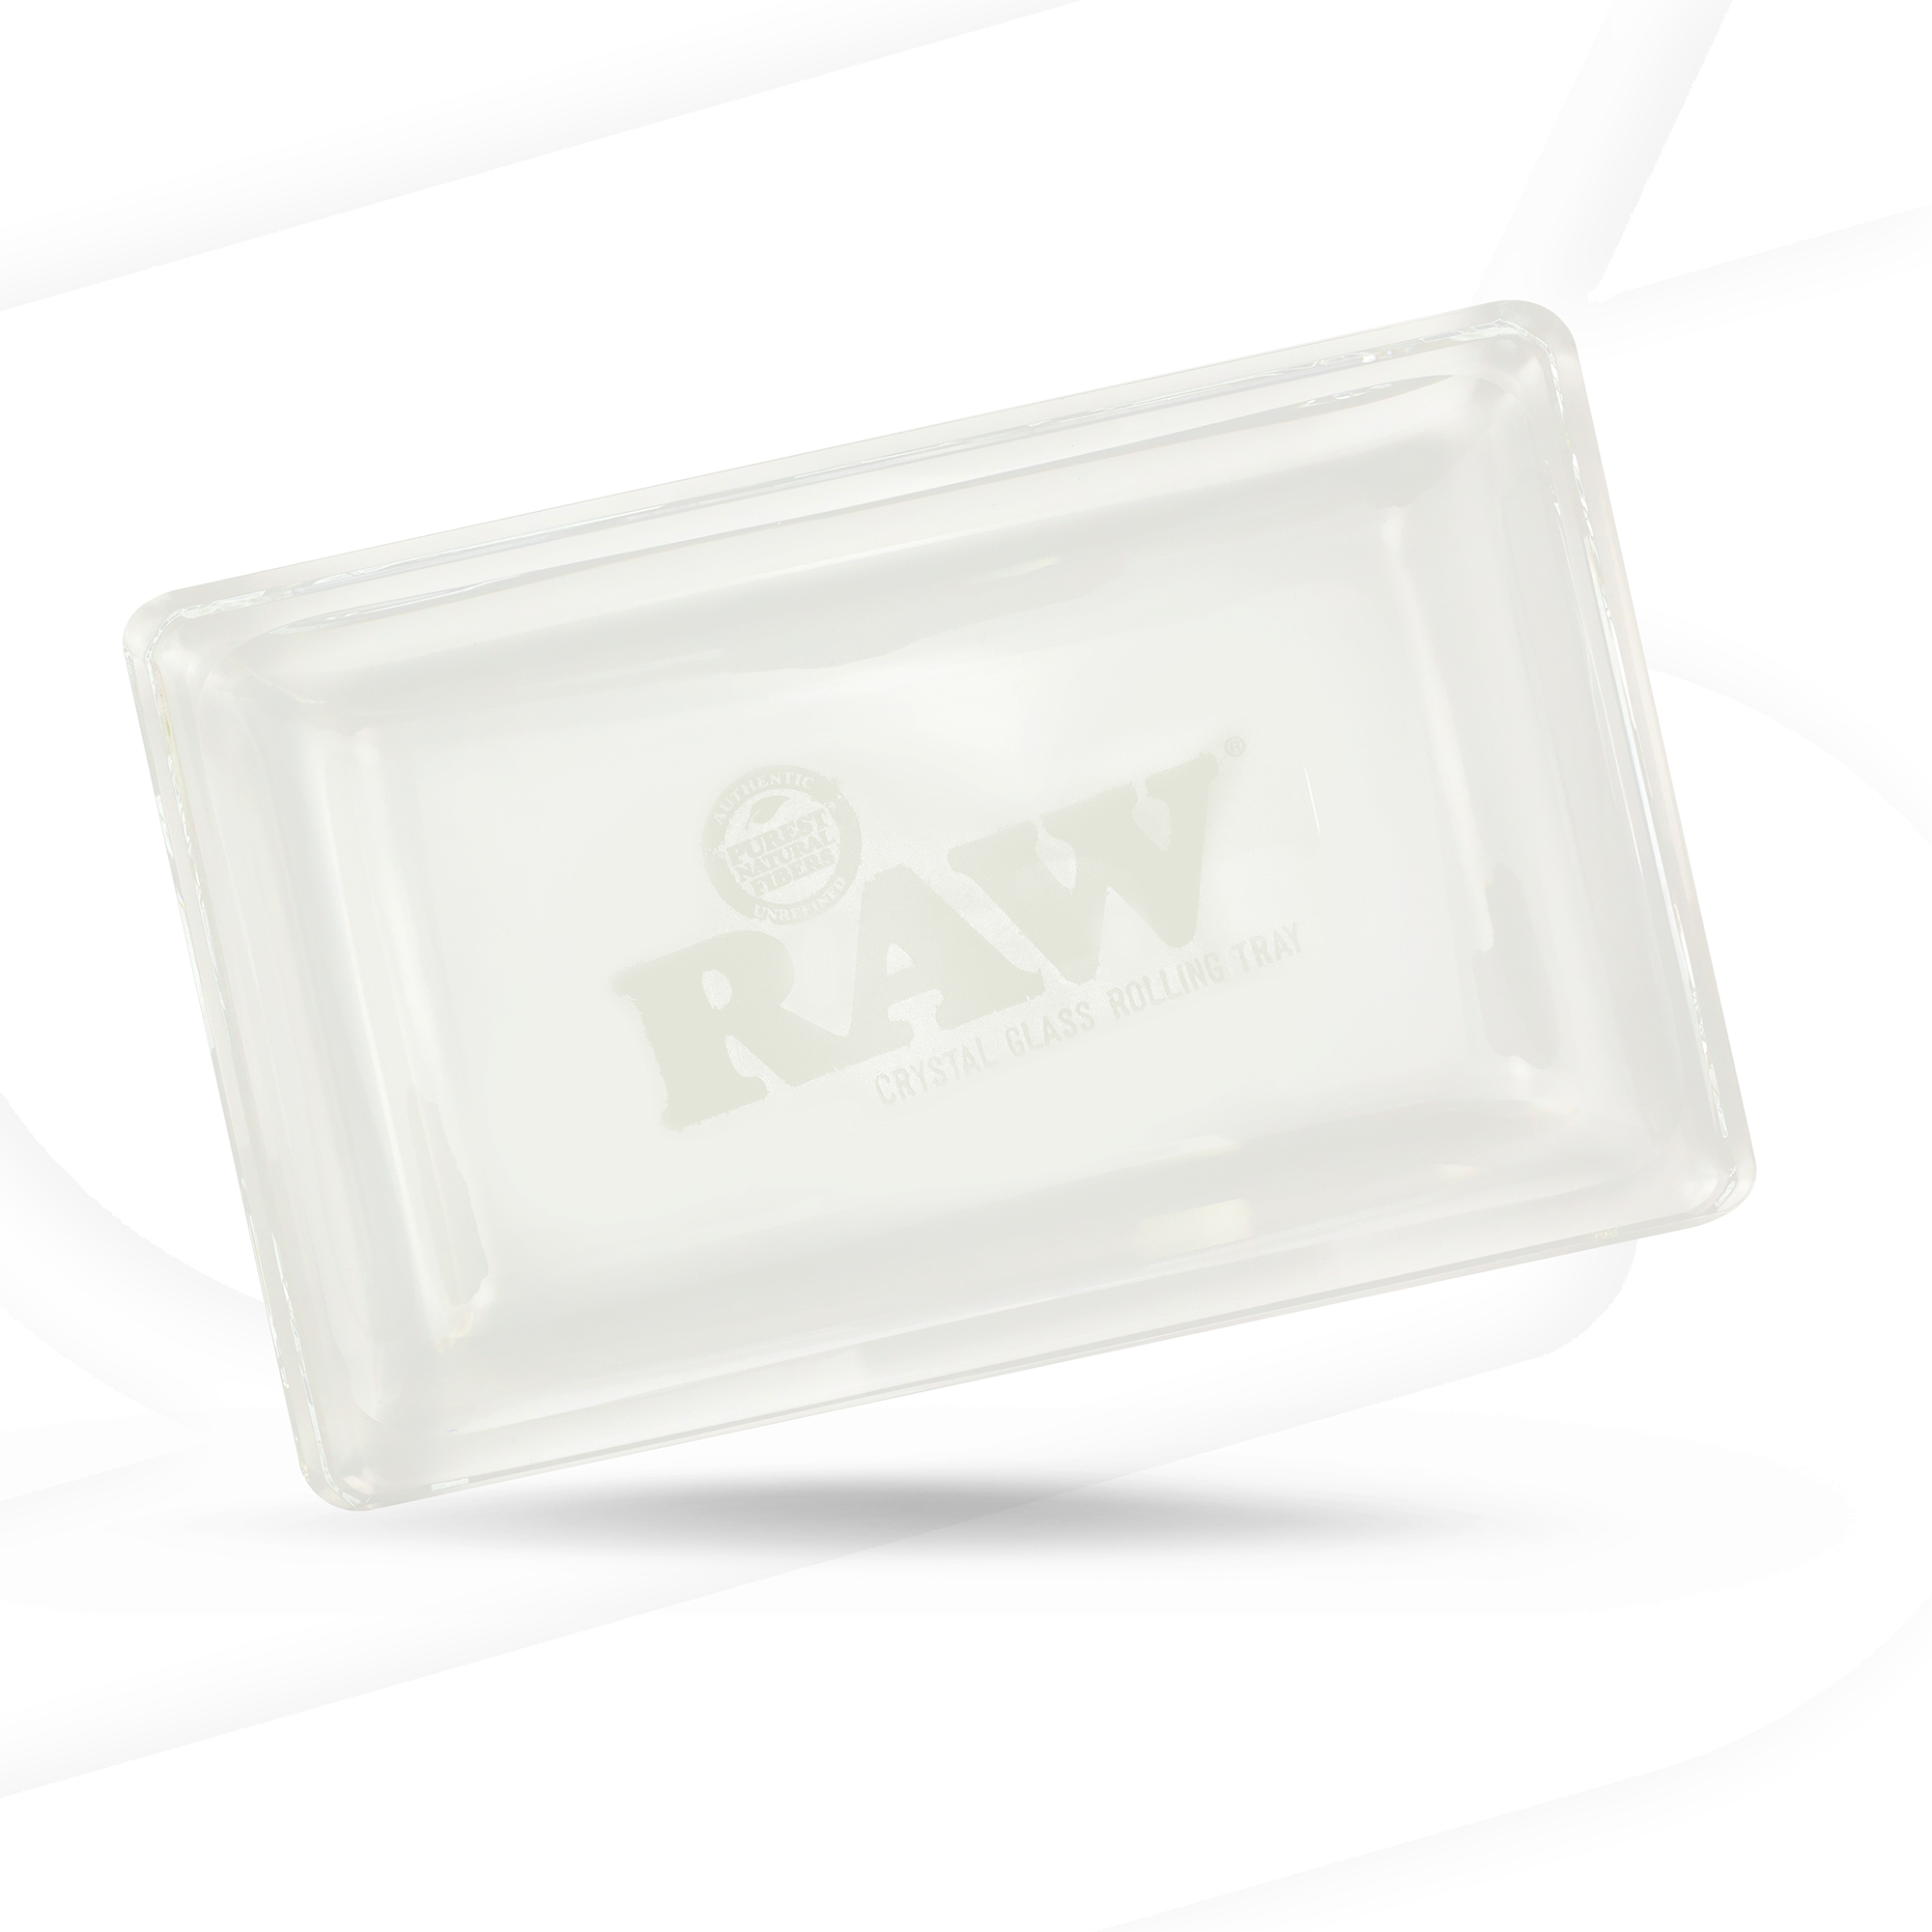 RAW Crystal Glass Rolling Tray Rolling Trays WAR00112-MUSA01 esd-official